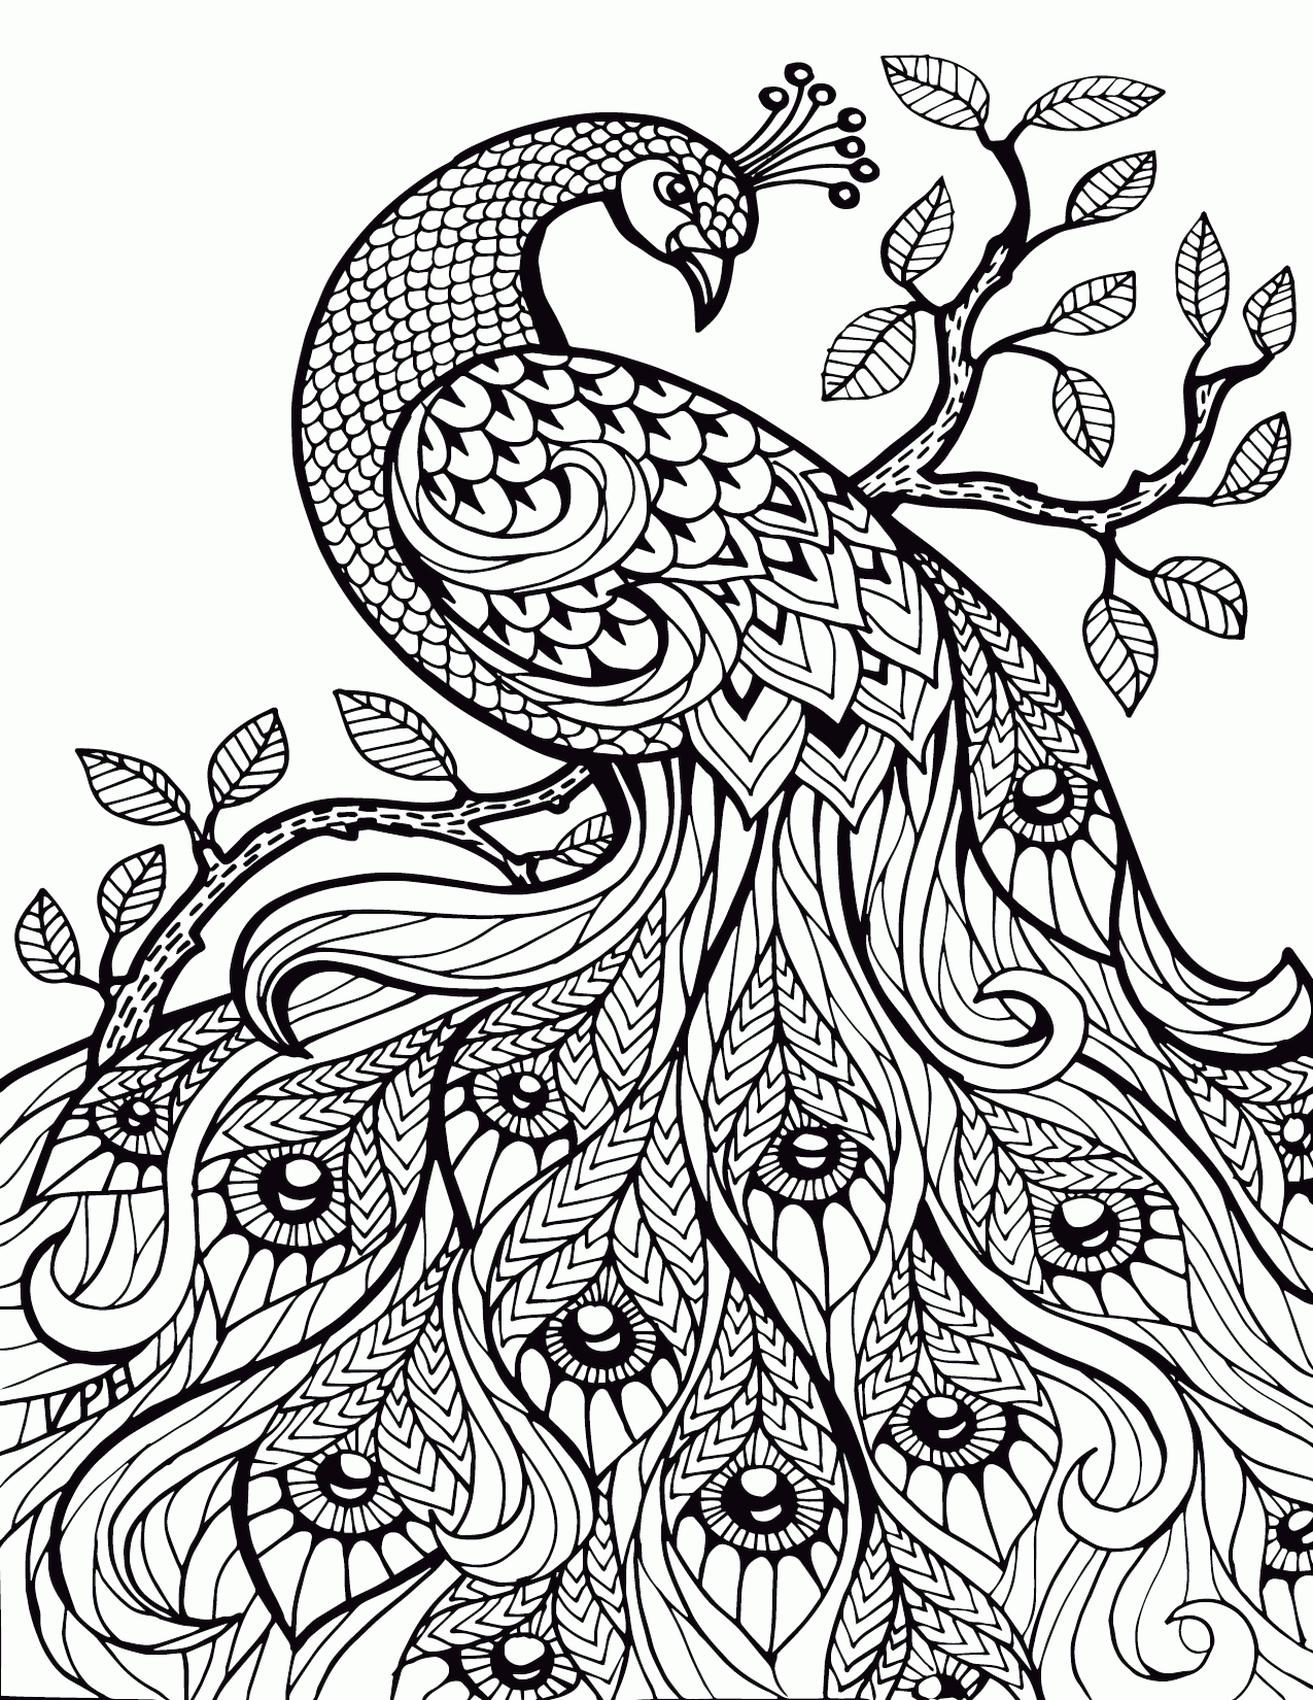 Get This Adult Coloring Pages Animals Peacock 1